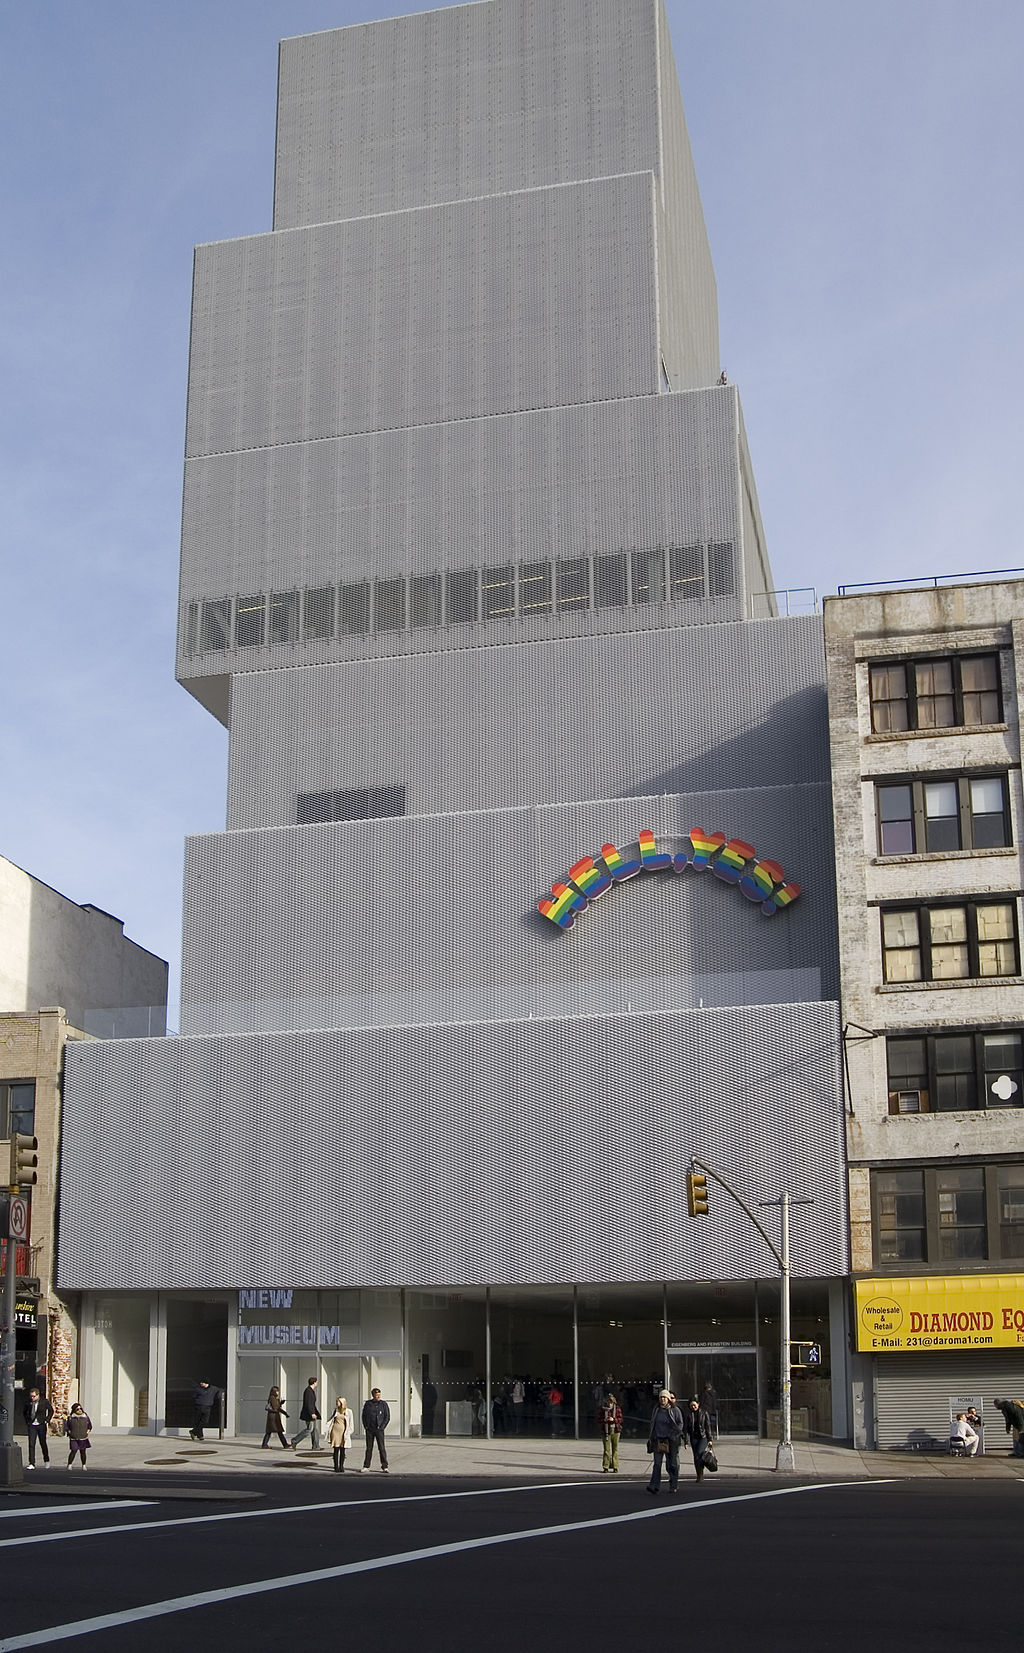 The New Museum of Contemporary Art in New York City, designed by the Japanese architecture firm SANAA (Sejima and Nishizawa and Associates), 1977.